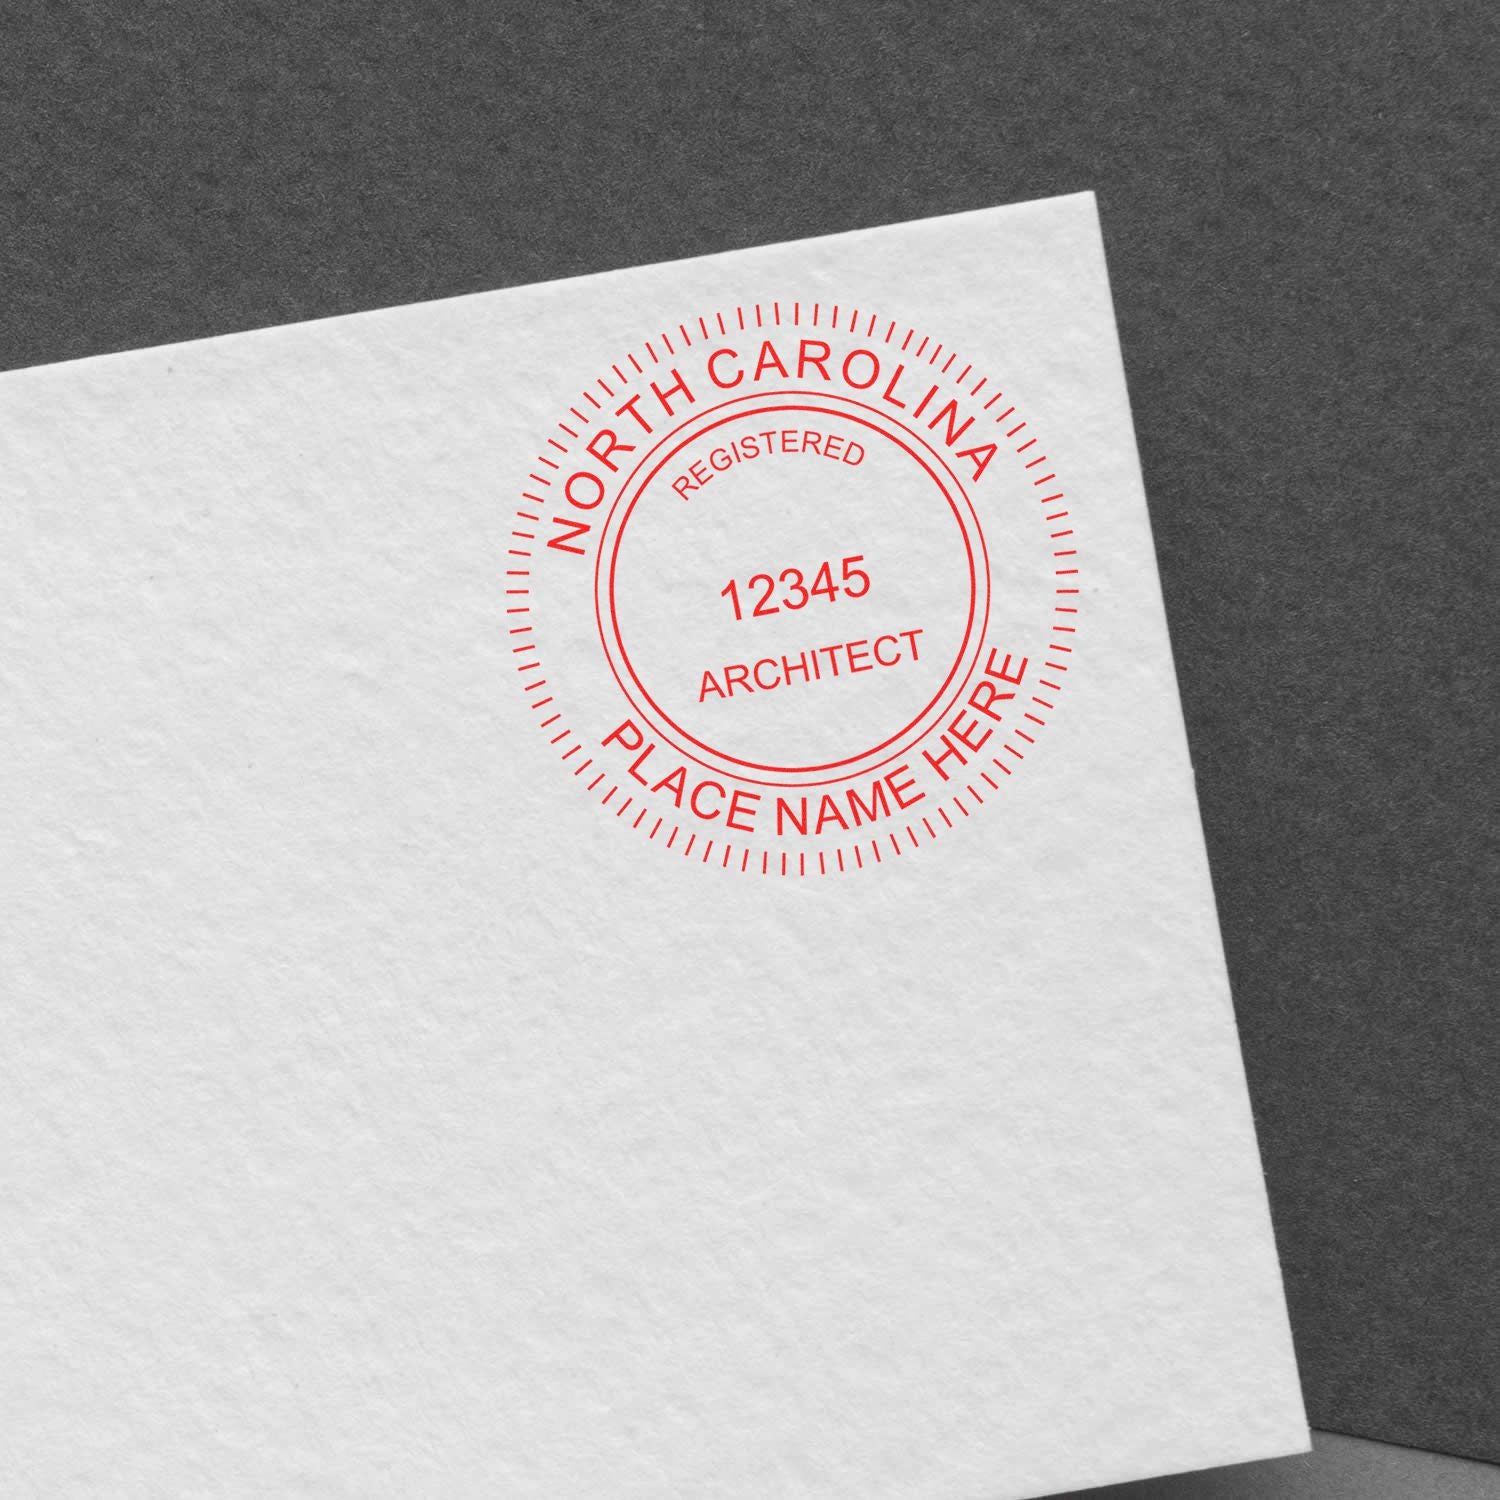 The Slim Pre-Inked North Carolina Architect Seal Stamp stamp impression comes to life with a crisp, detailed photo on paper - showcasing true professional quality.